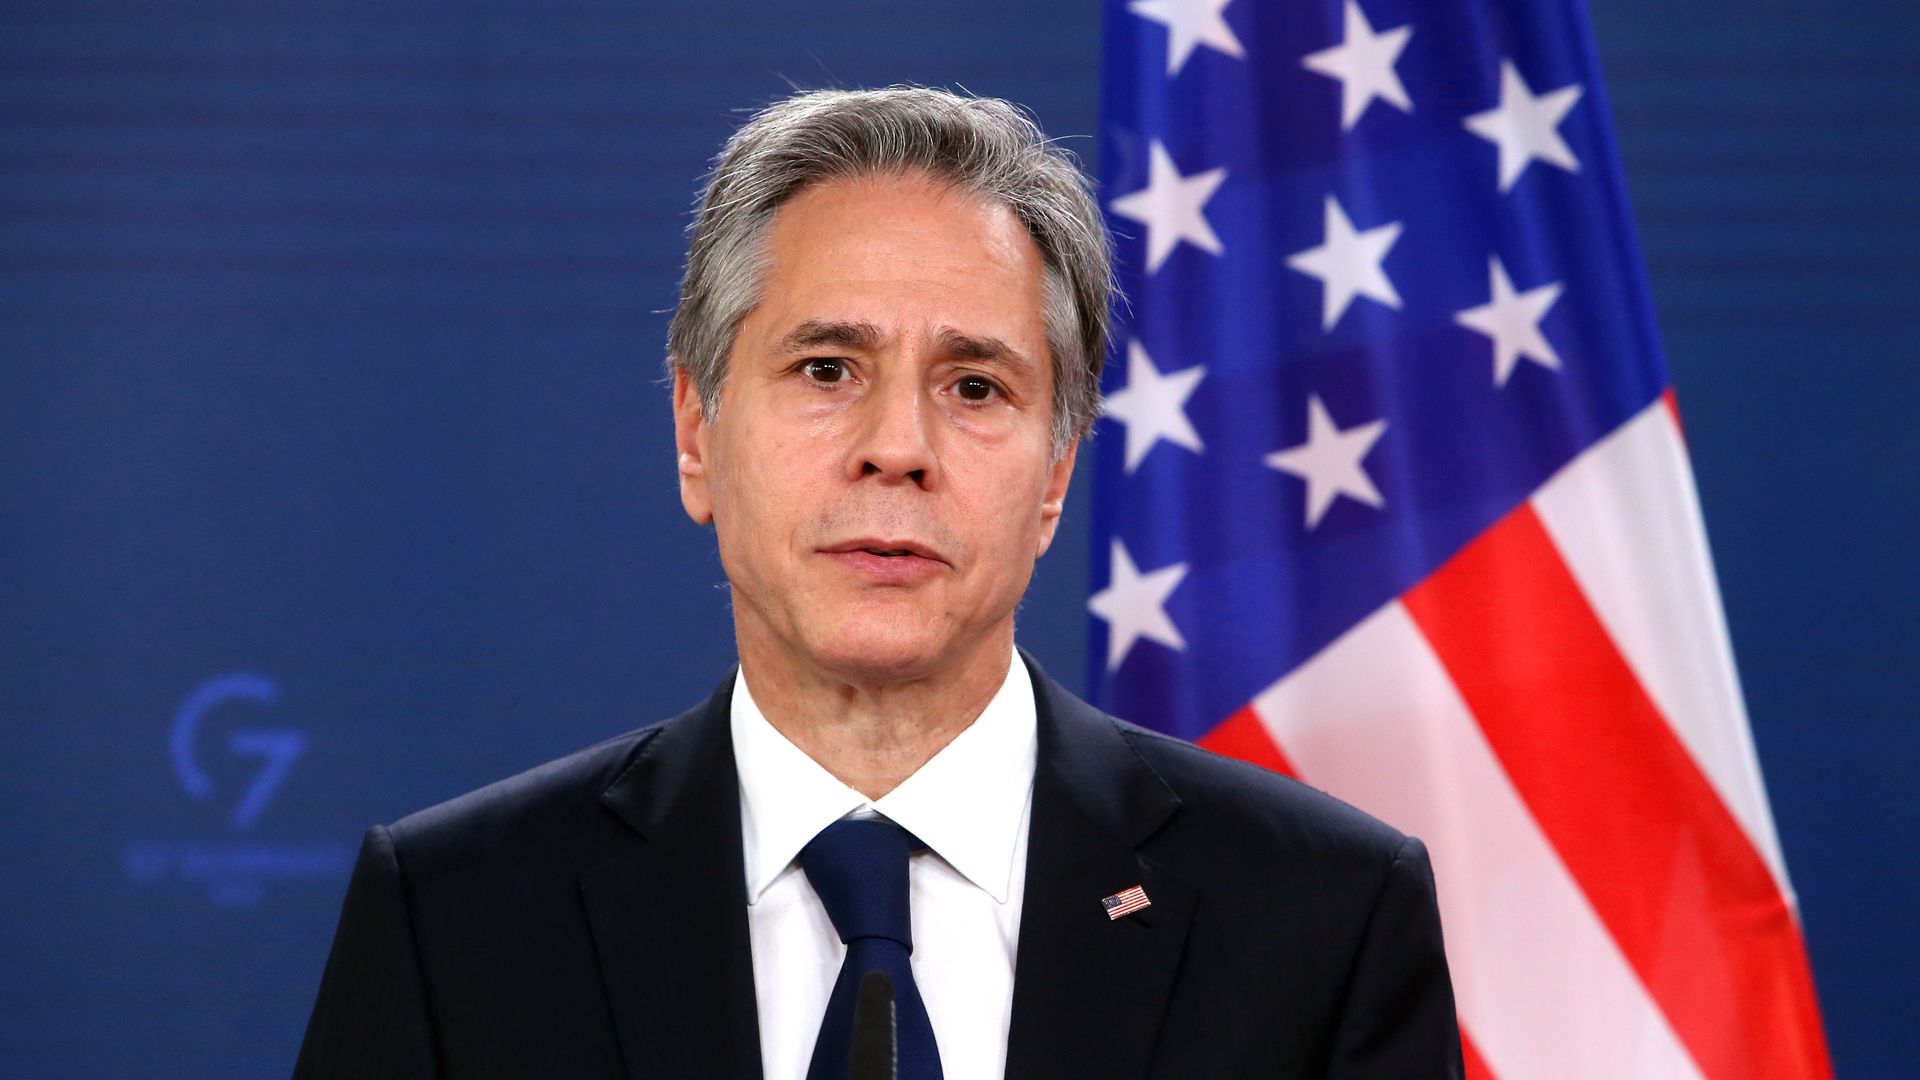 United States Secretary of State Antony Blinken attend a press conference at the Federal Foreign Office on June 24, 2022.